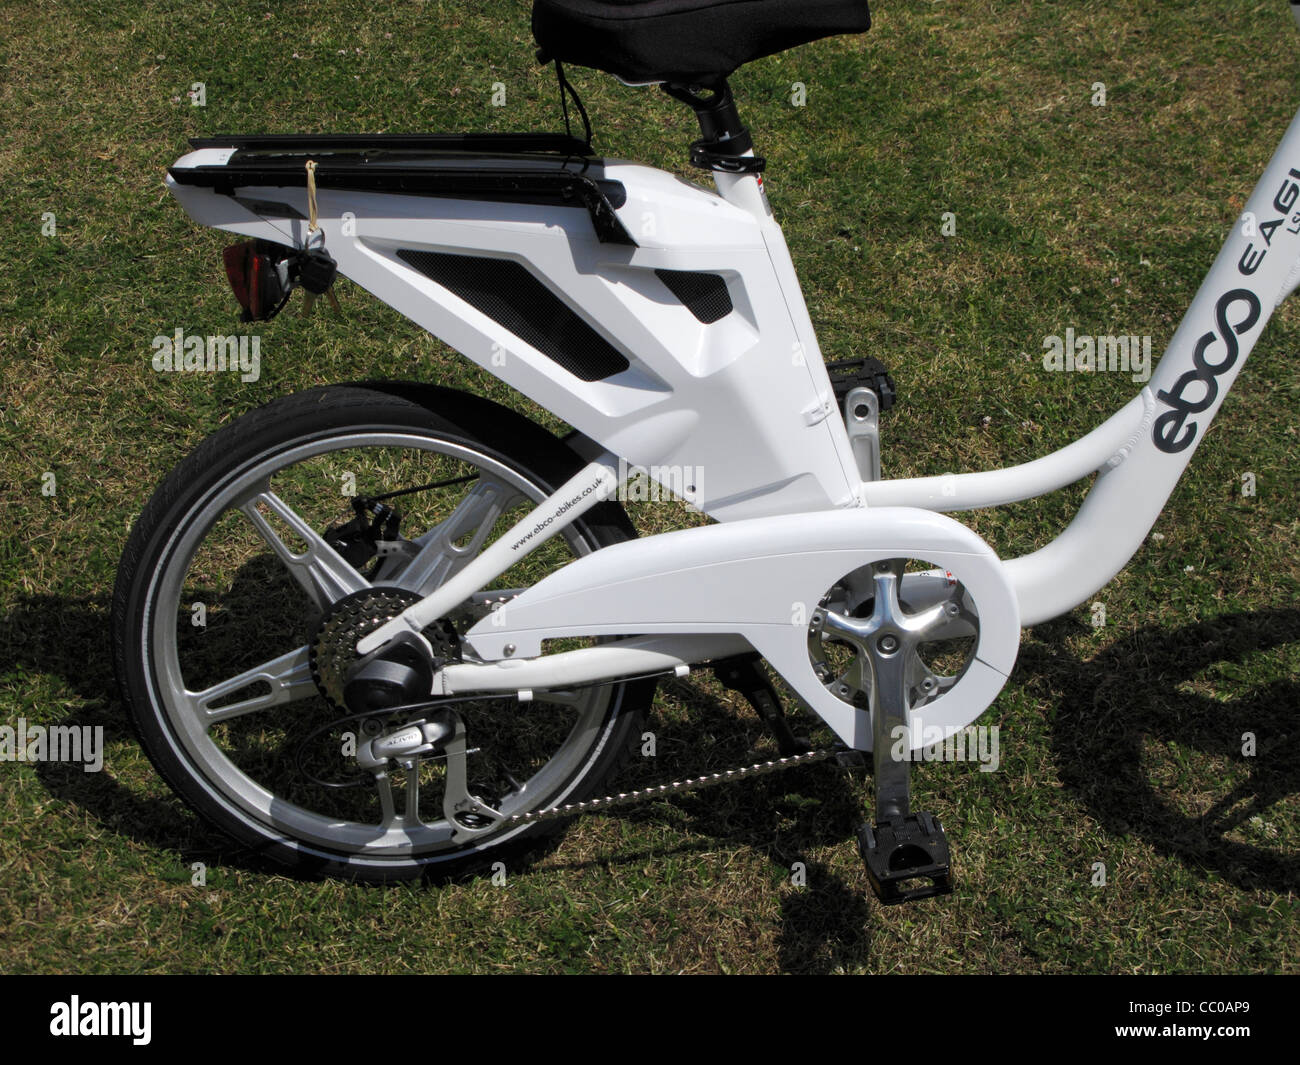 Closeup of the battery pack and motor of a shopper type electric bike with rear suspension Stock Photo